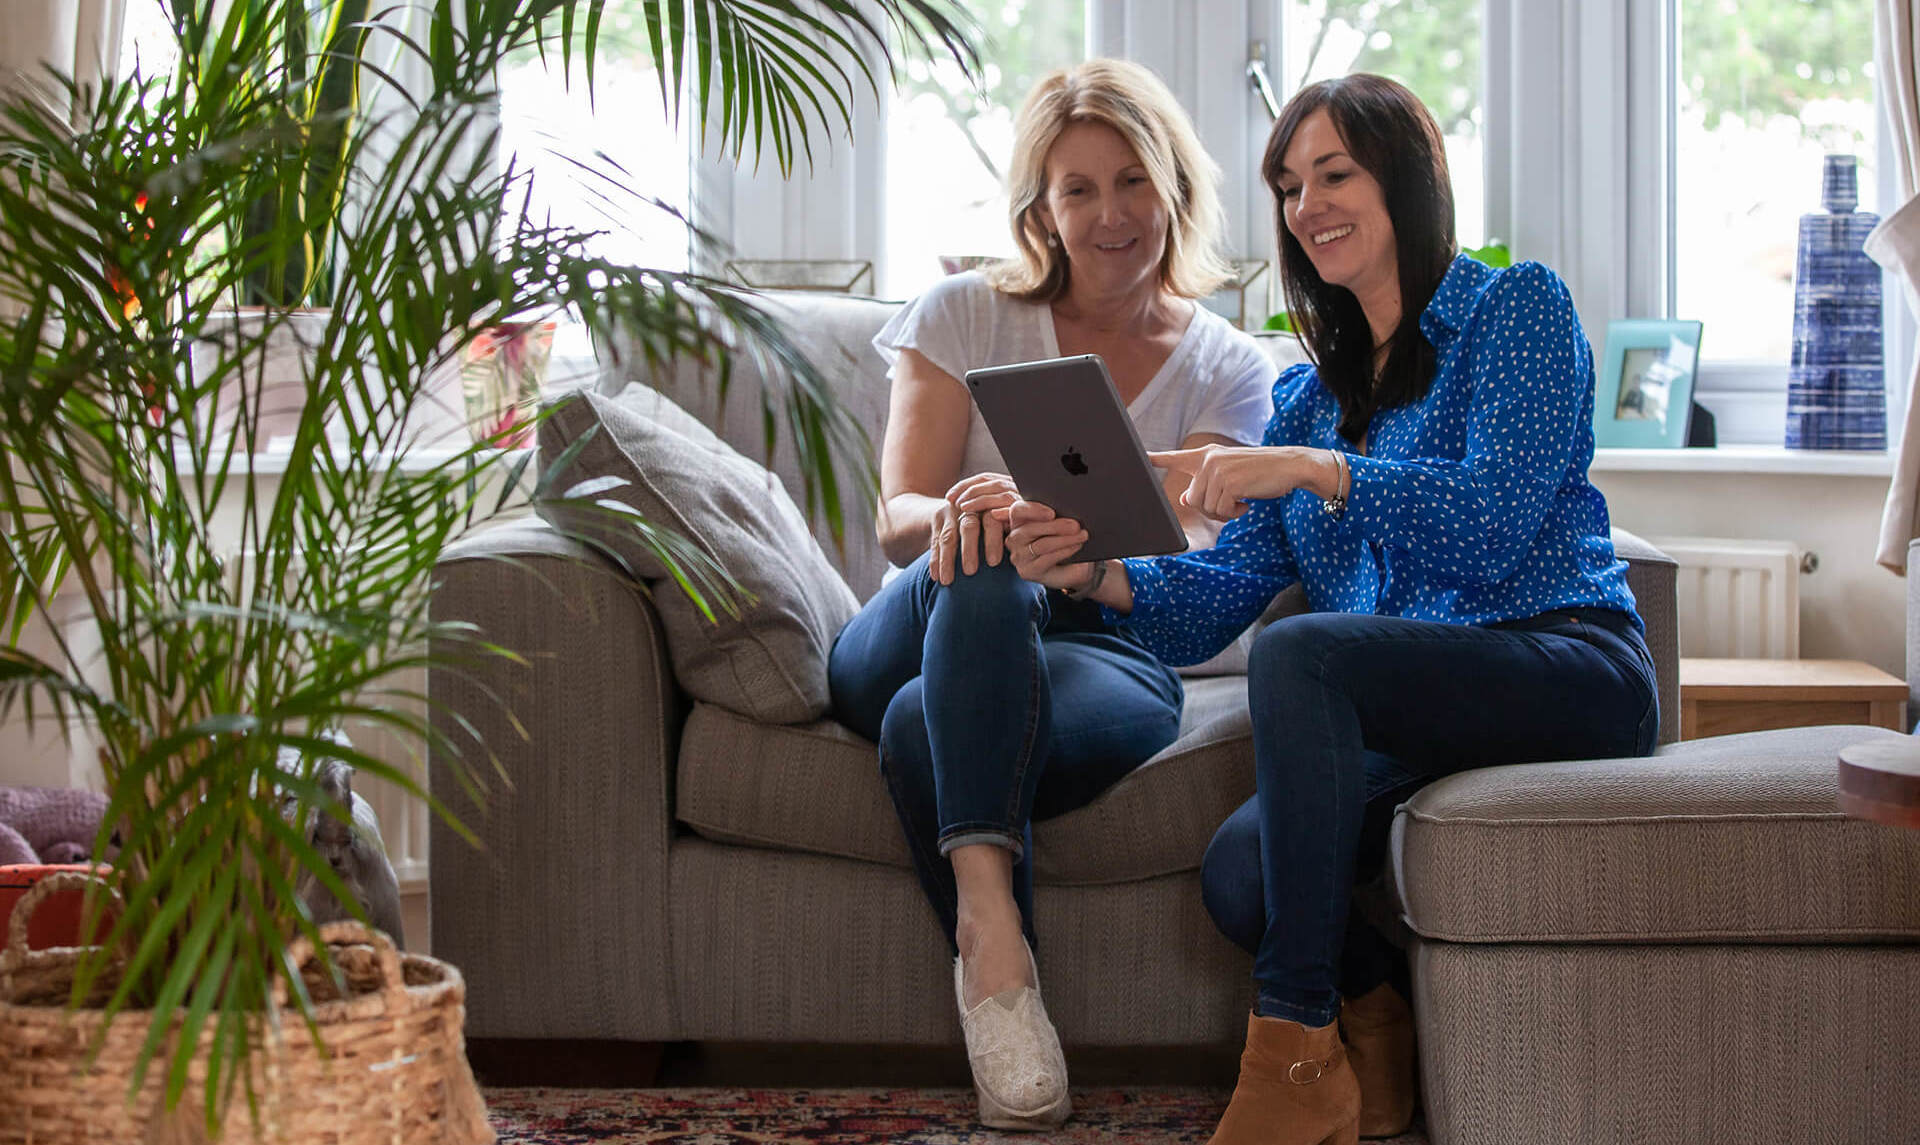 Two smiling women sat on a sofa looking at a screen on a tablet